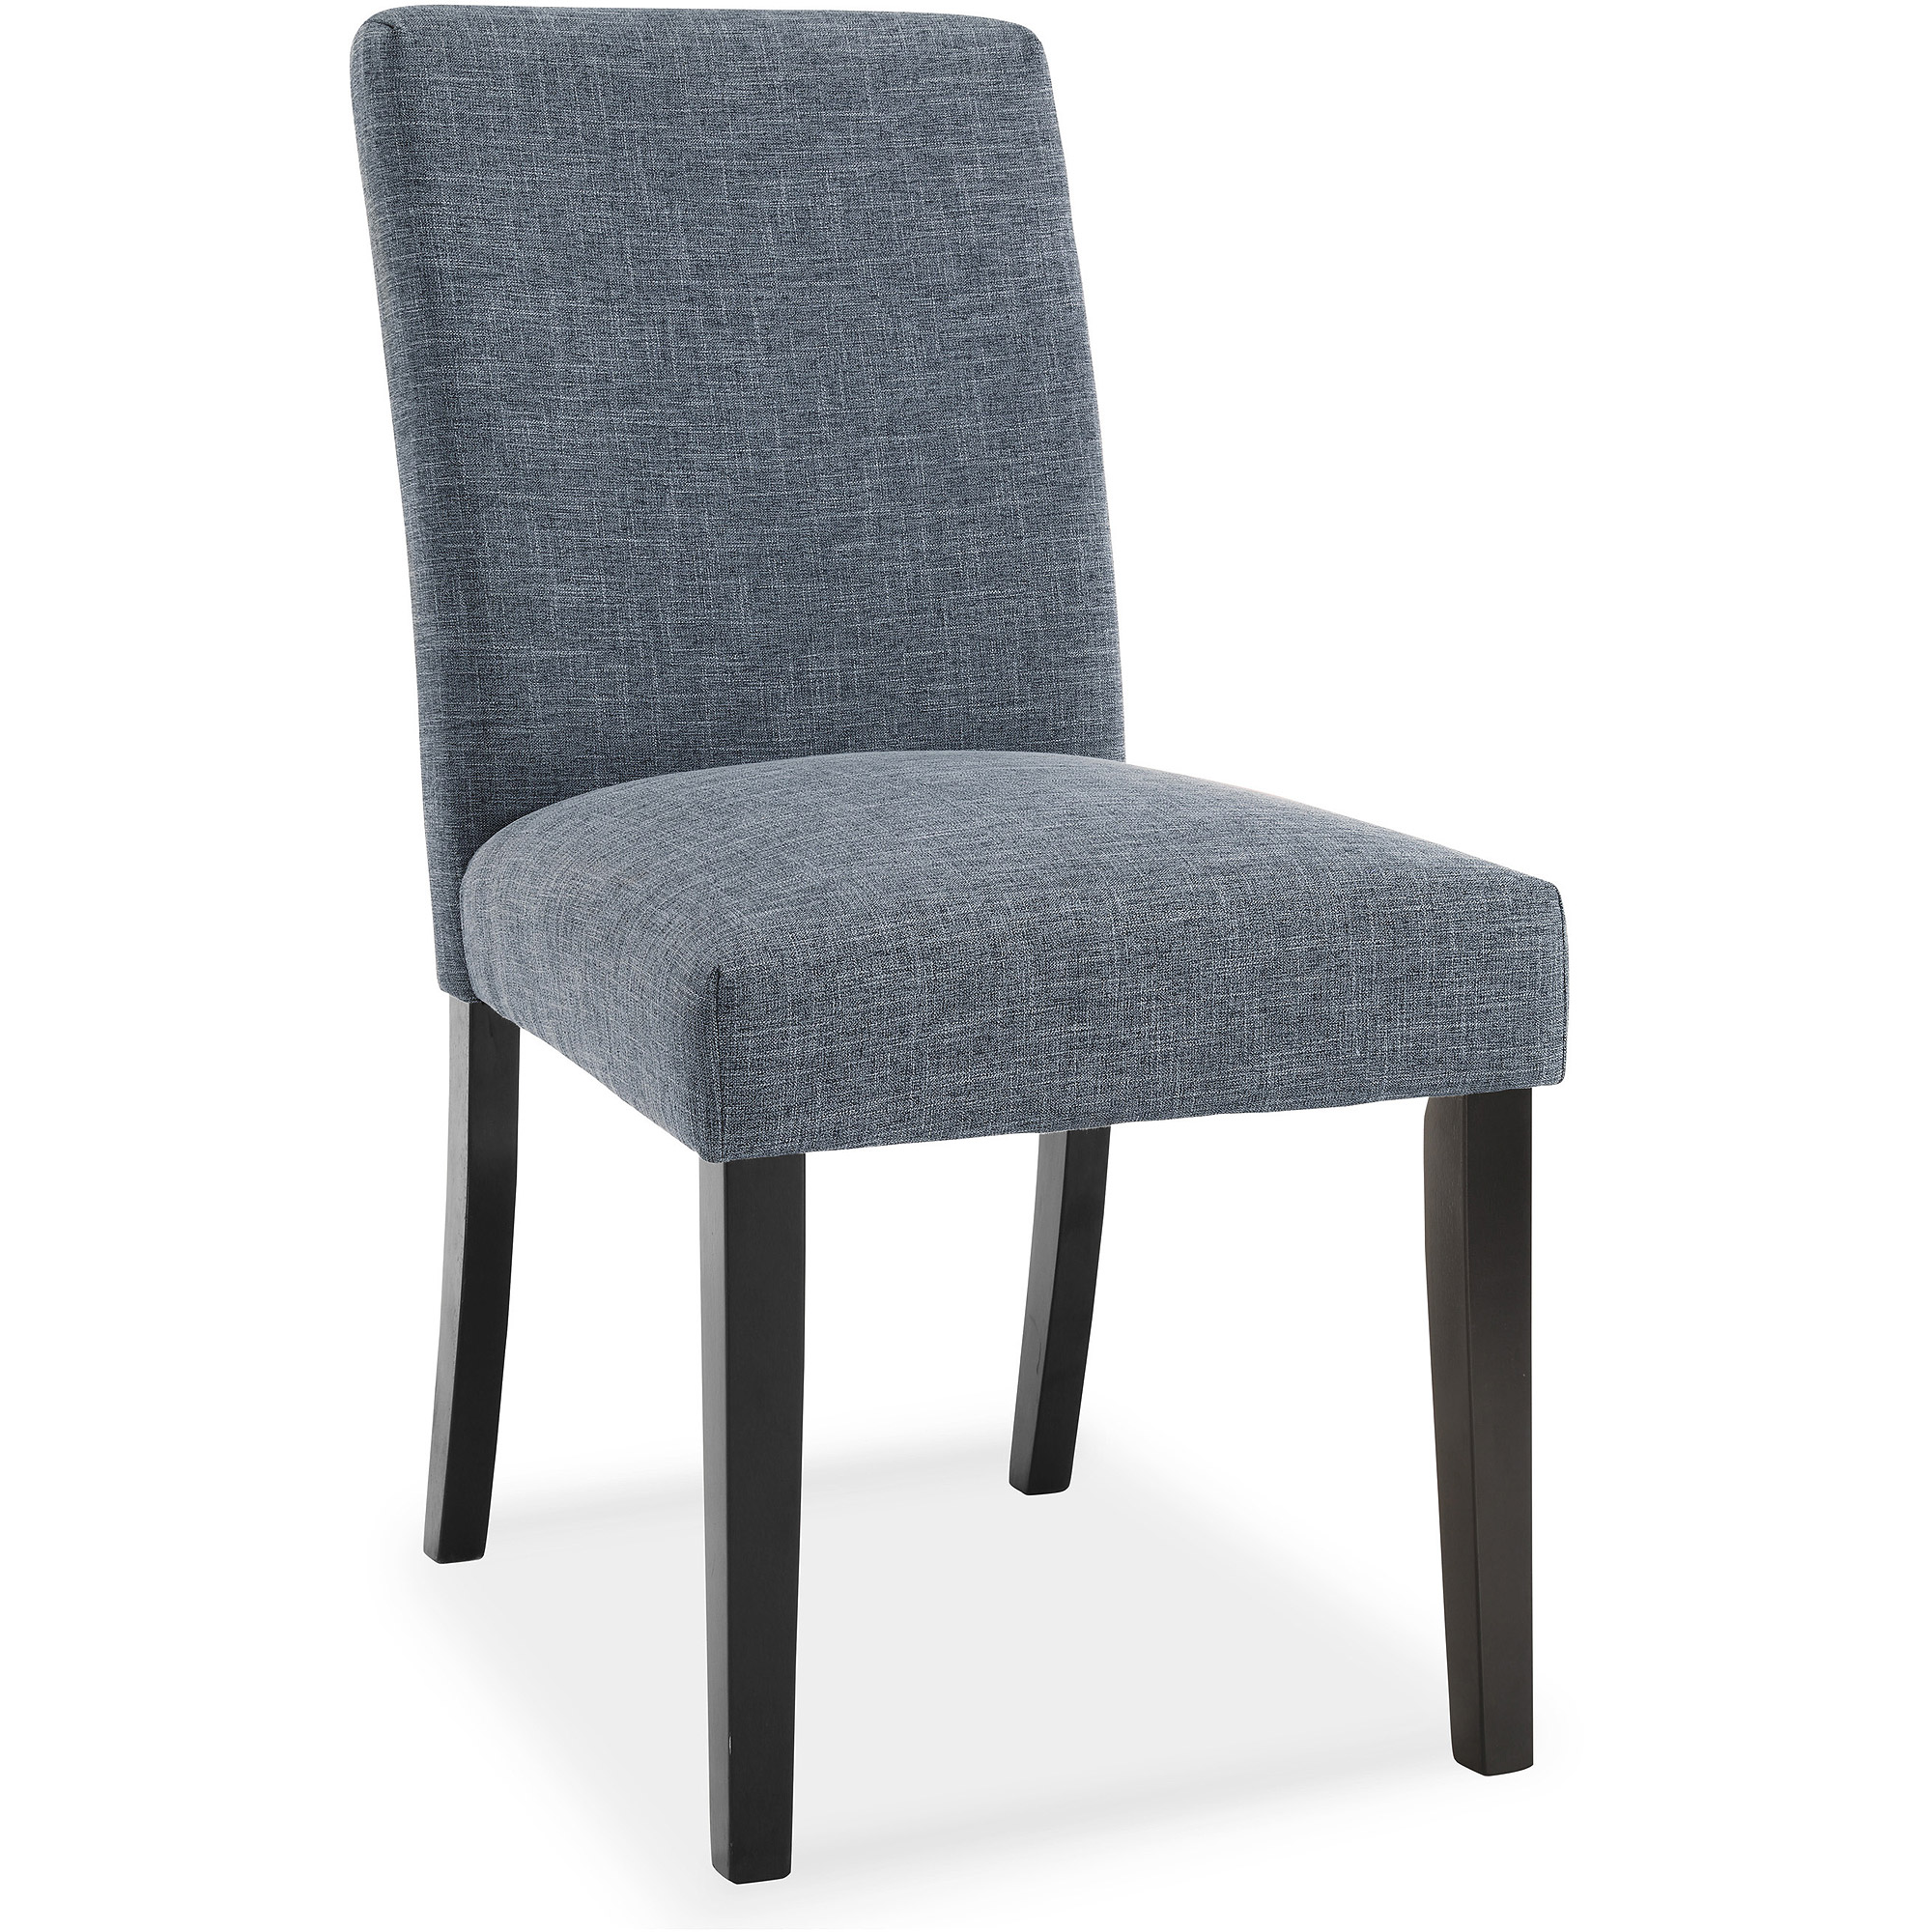 Popular DHI Frankfurt Upholstered Parsons Dining Chair - Walmart.com parsons dining chairs